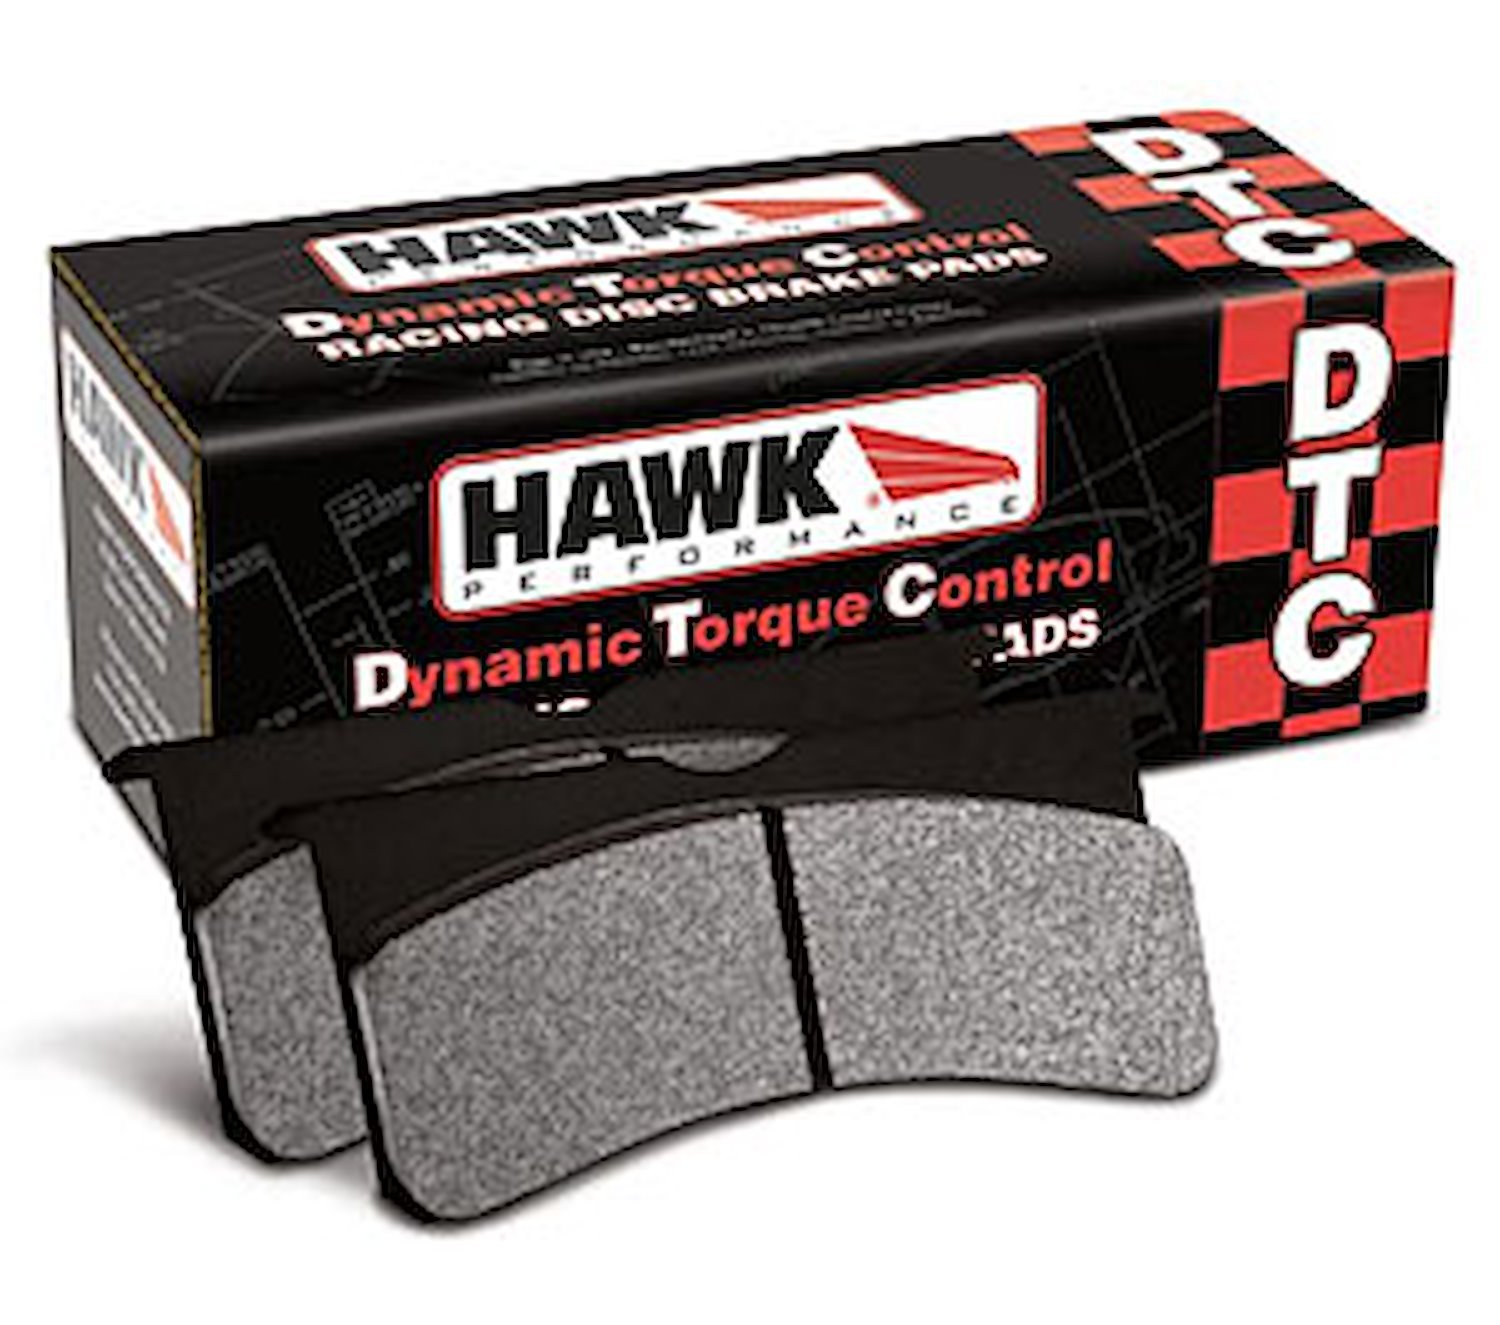 DTC-60 Circle Track Brake Pads for Cadillac ATS, CT6, CTS, XTS; Chevy Corvette - 0.590 Thickness